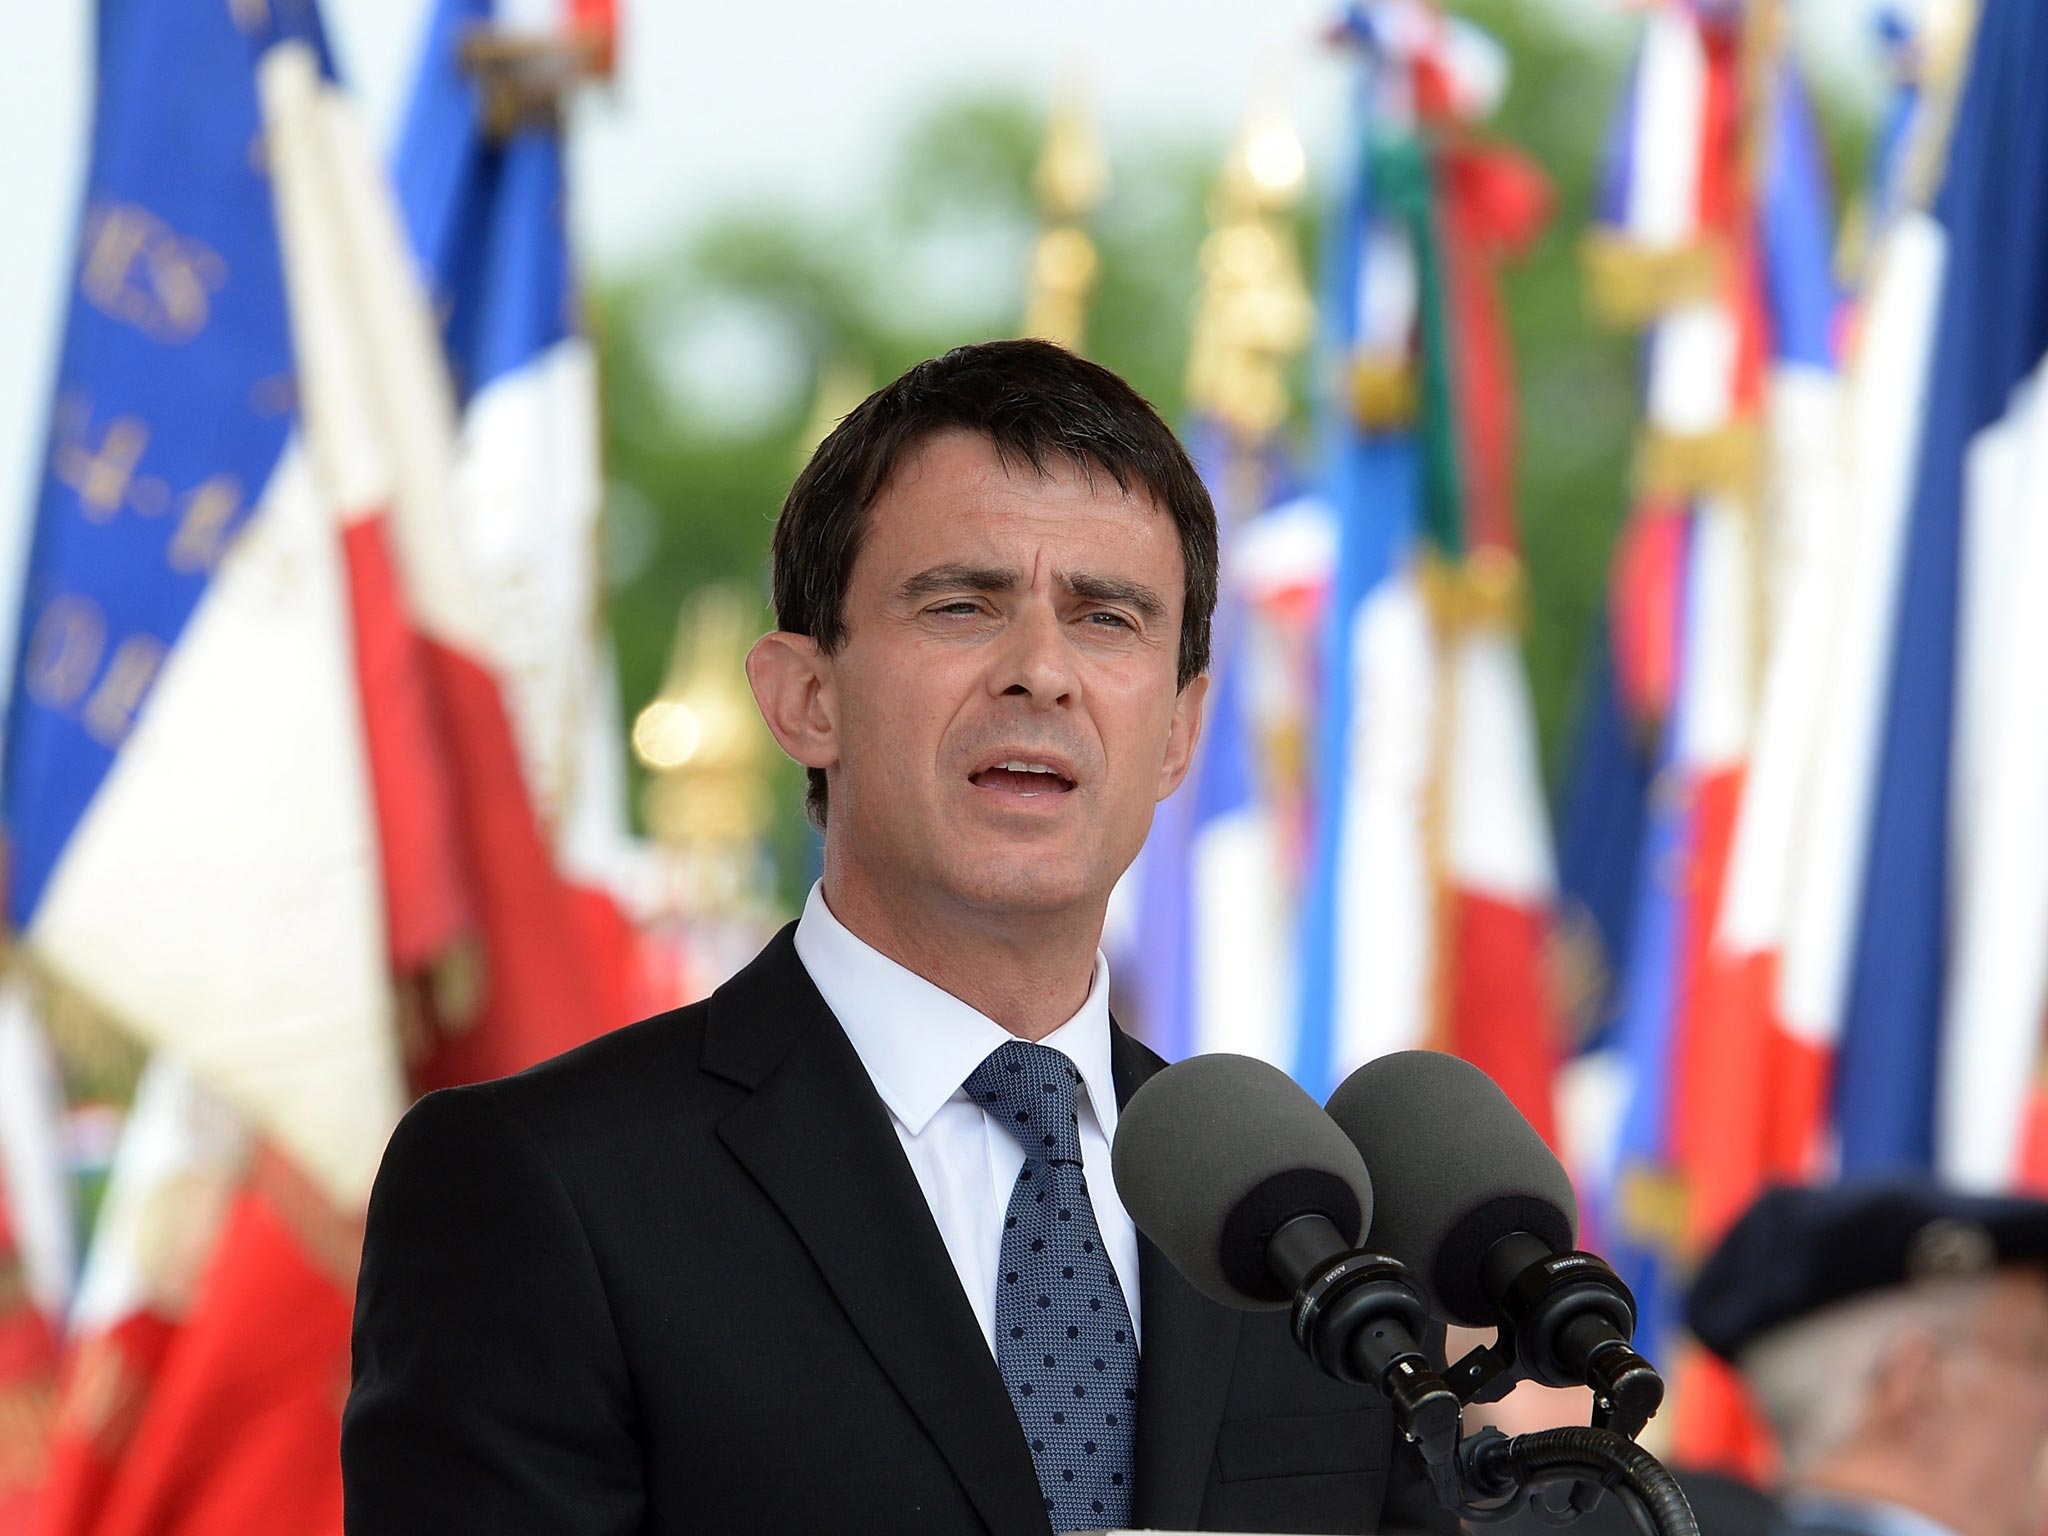 Manuel Valls vowed to wage a war on terror